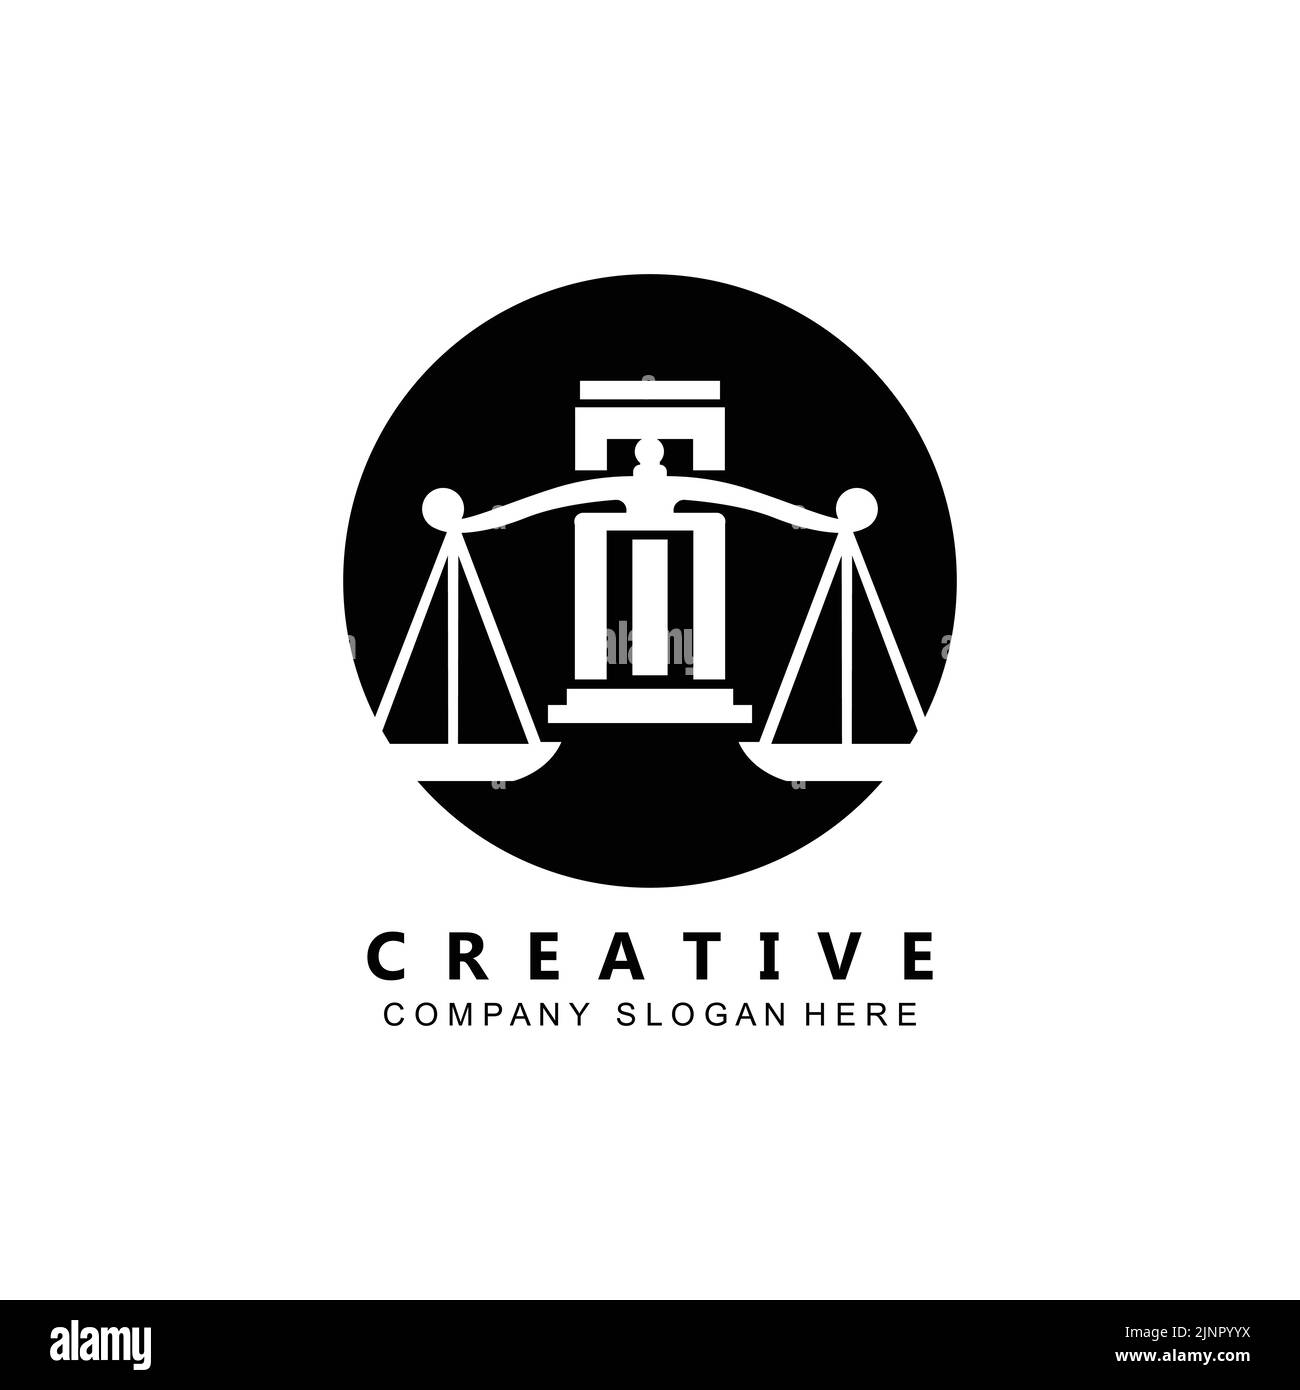 Lawyer or Justice law logo vector design, icon illustration Stock Vector